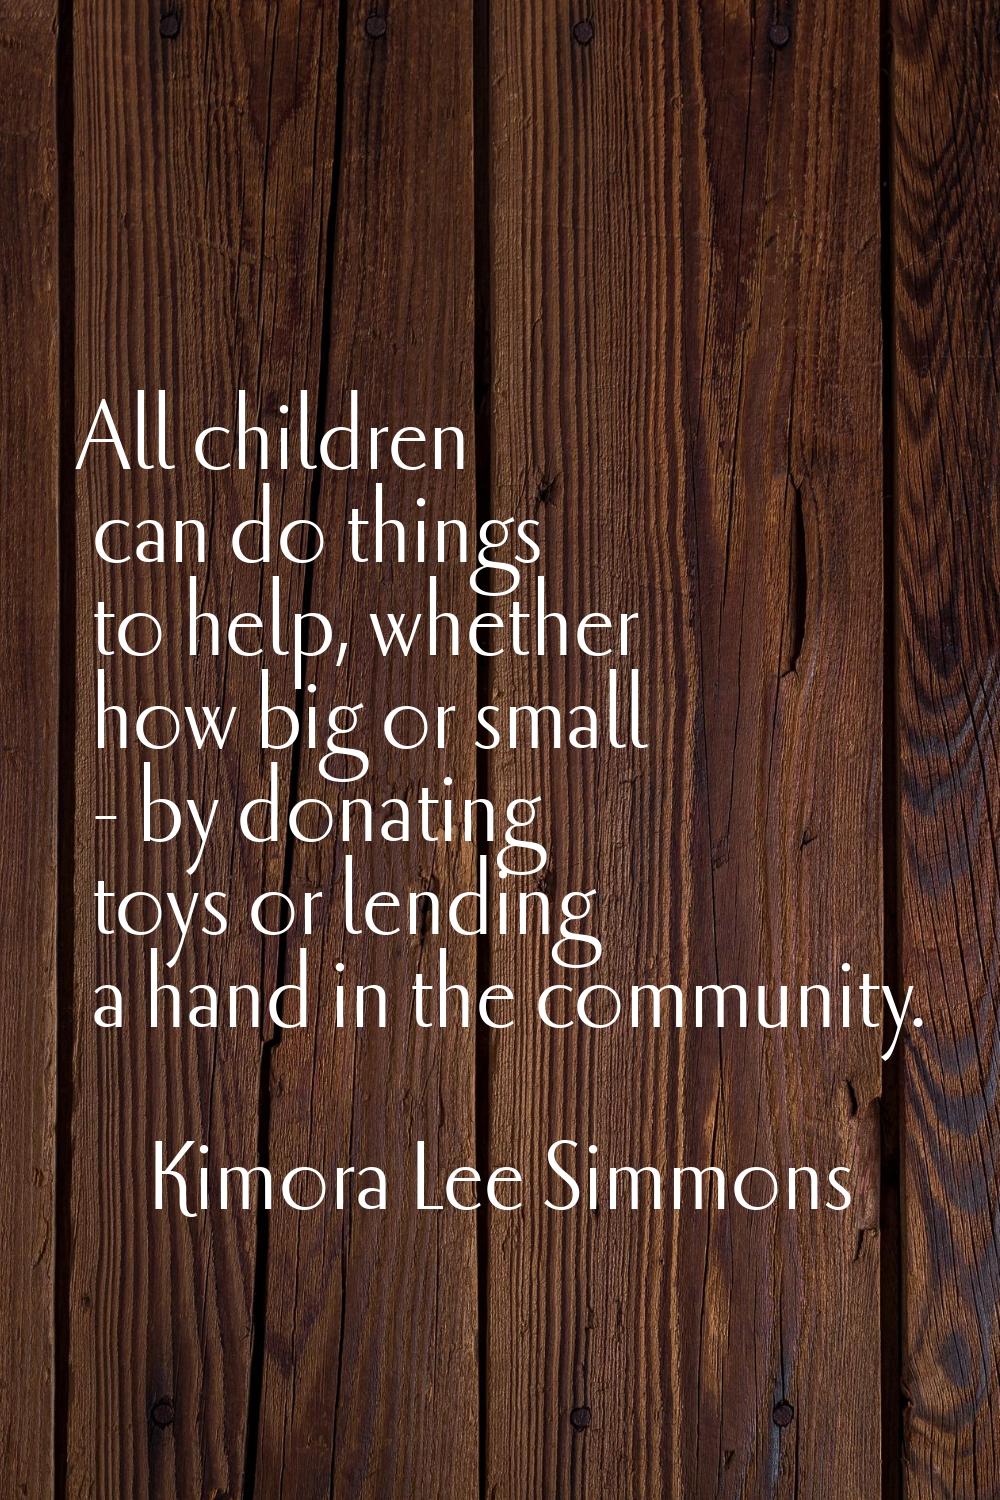 All children can do things to help, whether how big or small - by donating toys or lending a hand i